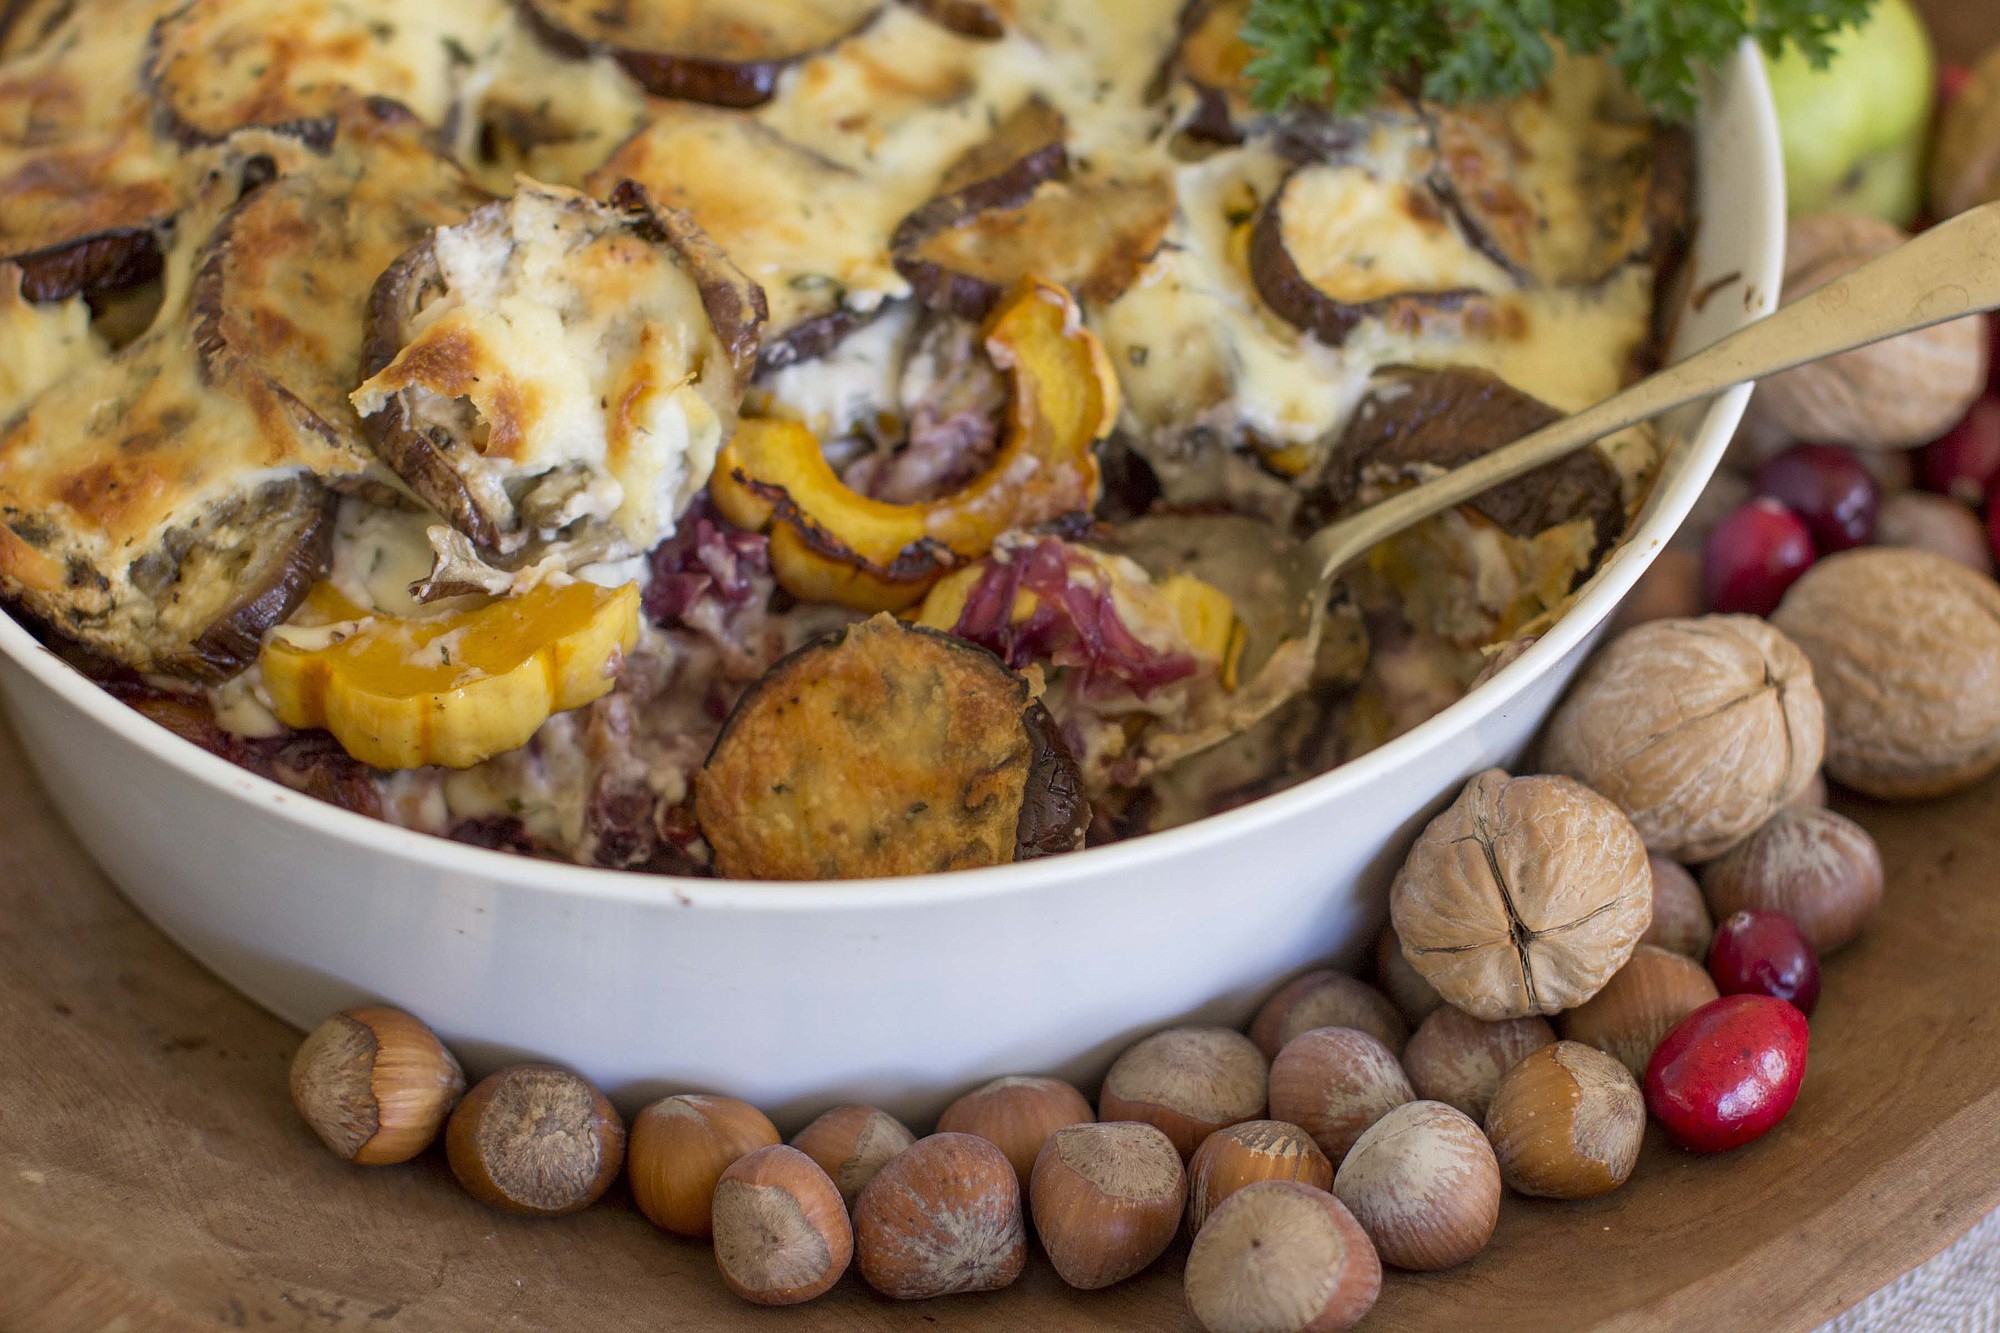 The deliciously creamy strata marries layers of roasted eggplant, delicata squash and red cabbage with bechamel sauce.